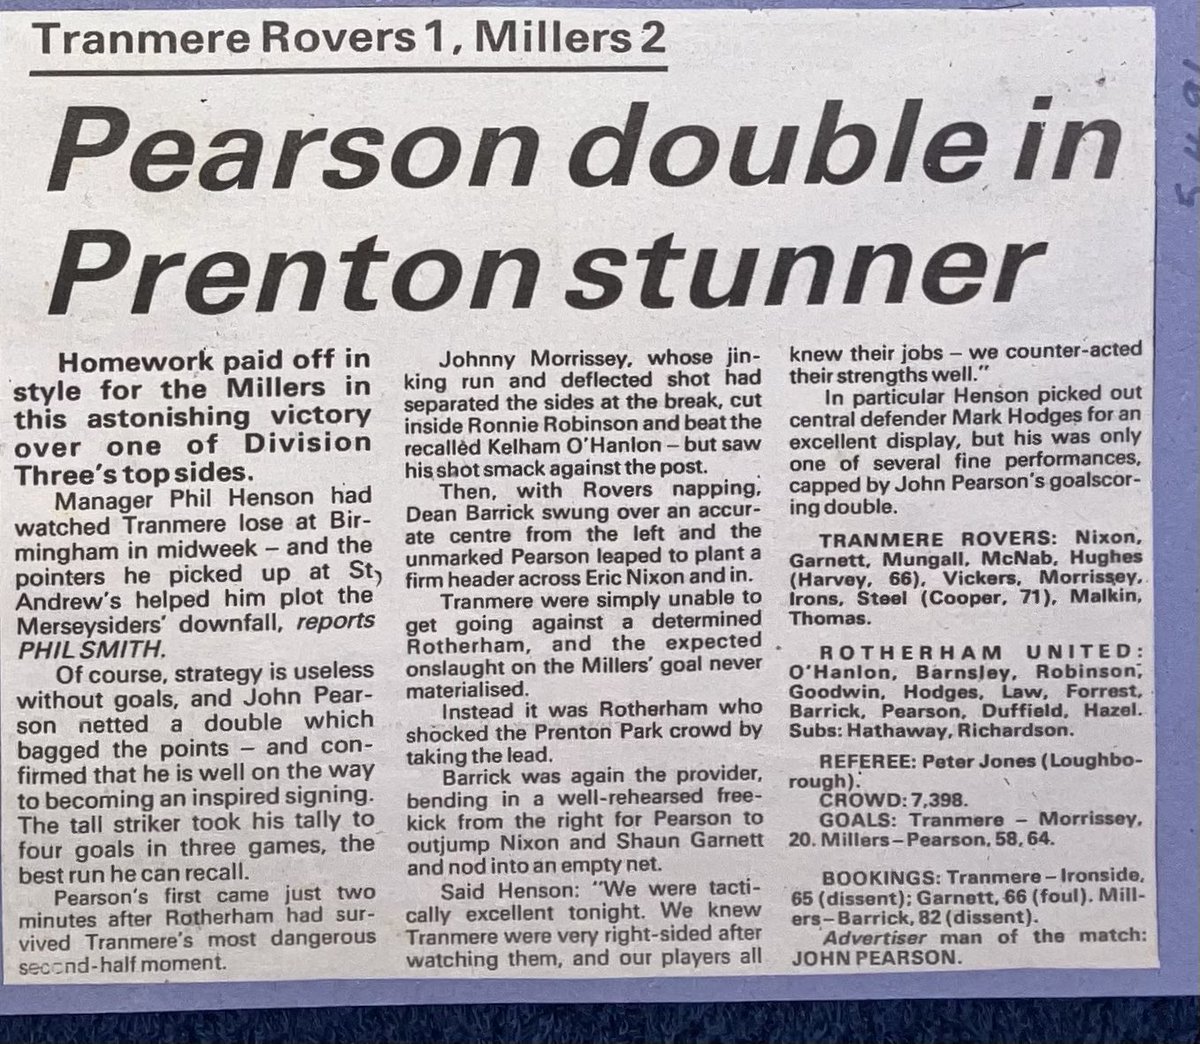 OTD 1991 Tranmere Rovers 1 Rotherham Utd 2. #rufc @ronniemoore John Pearson with both goals for the Millers. 5.4.91